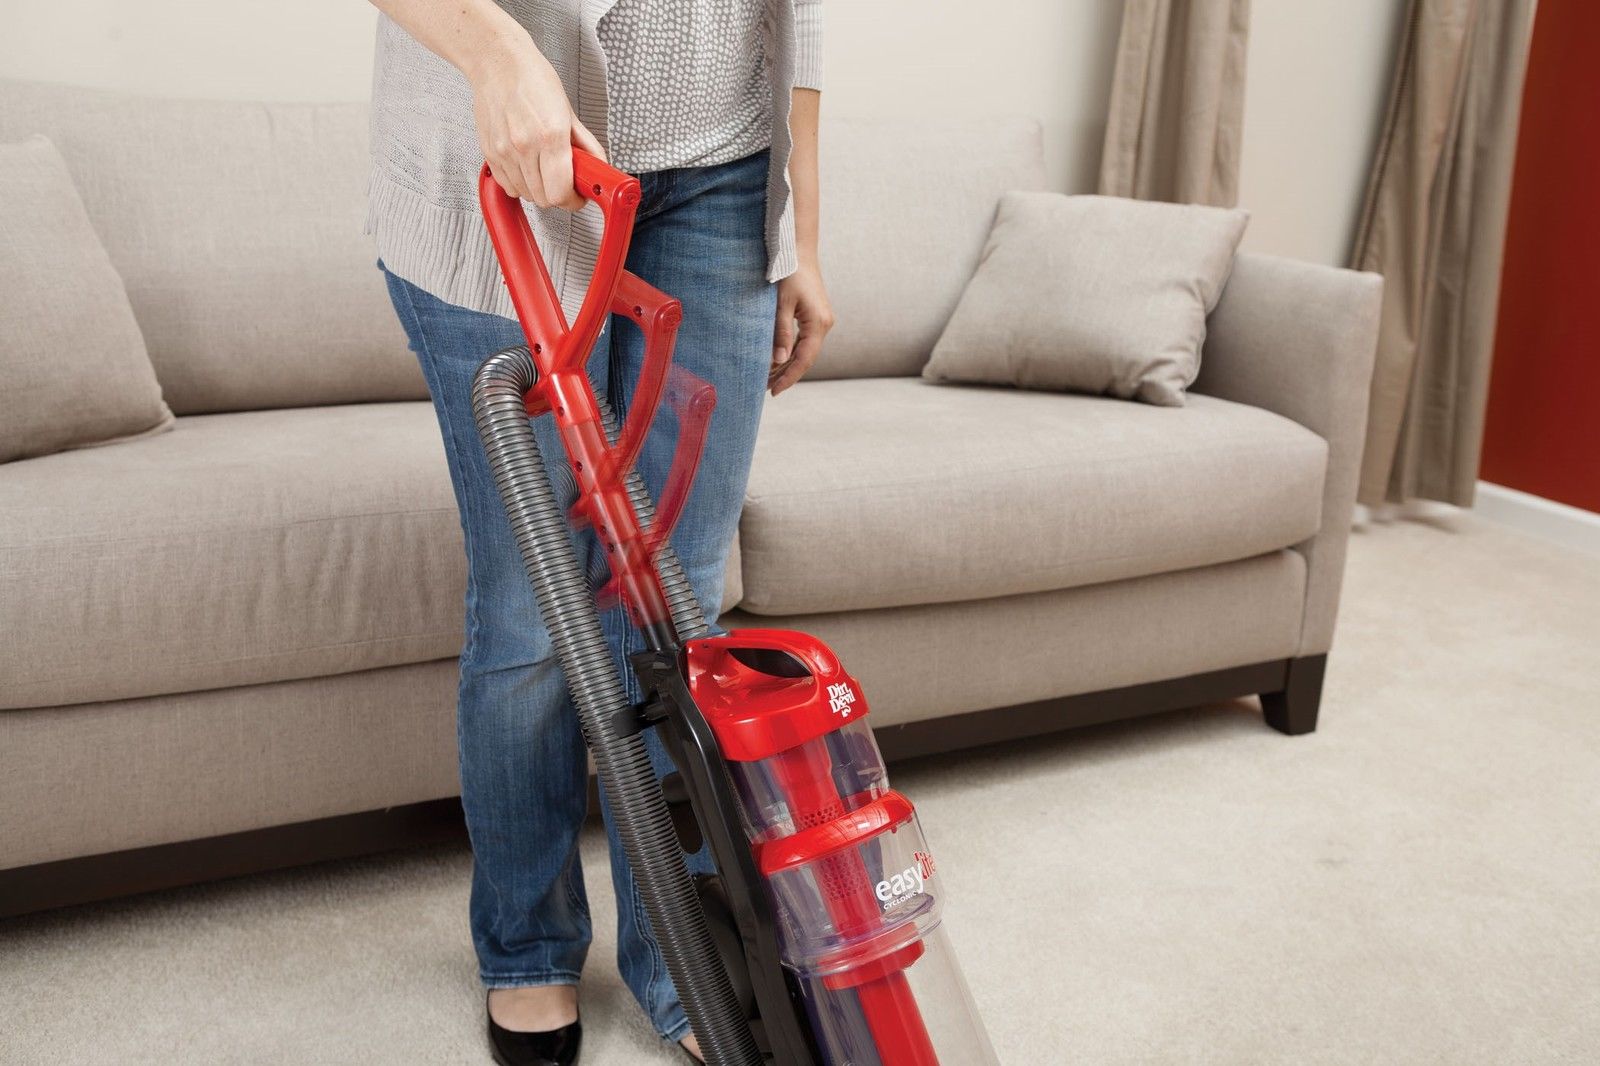 Dirt Devil Extreme Cyclonic Bagless Upright Vacuum Cleaner Just $35.99 With eBay Code!